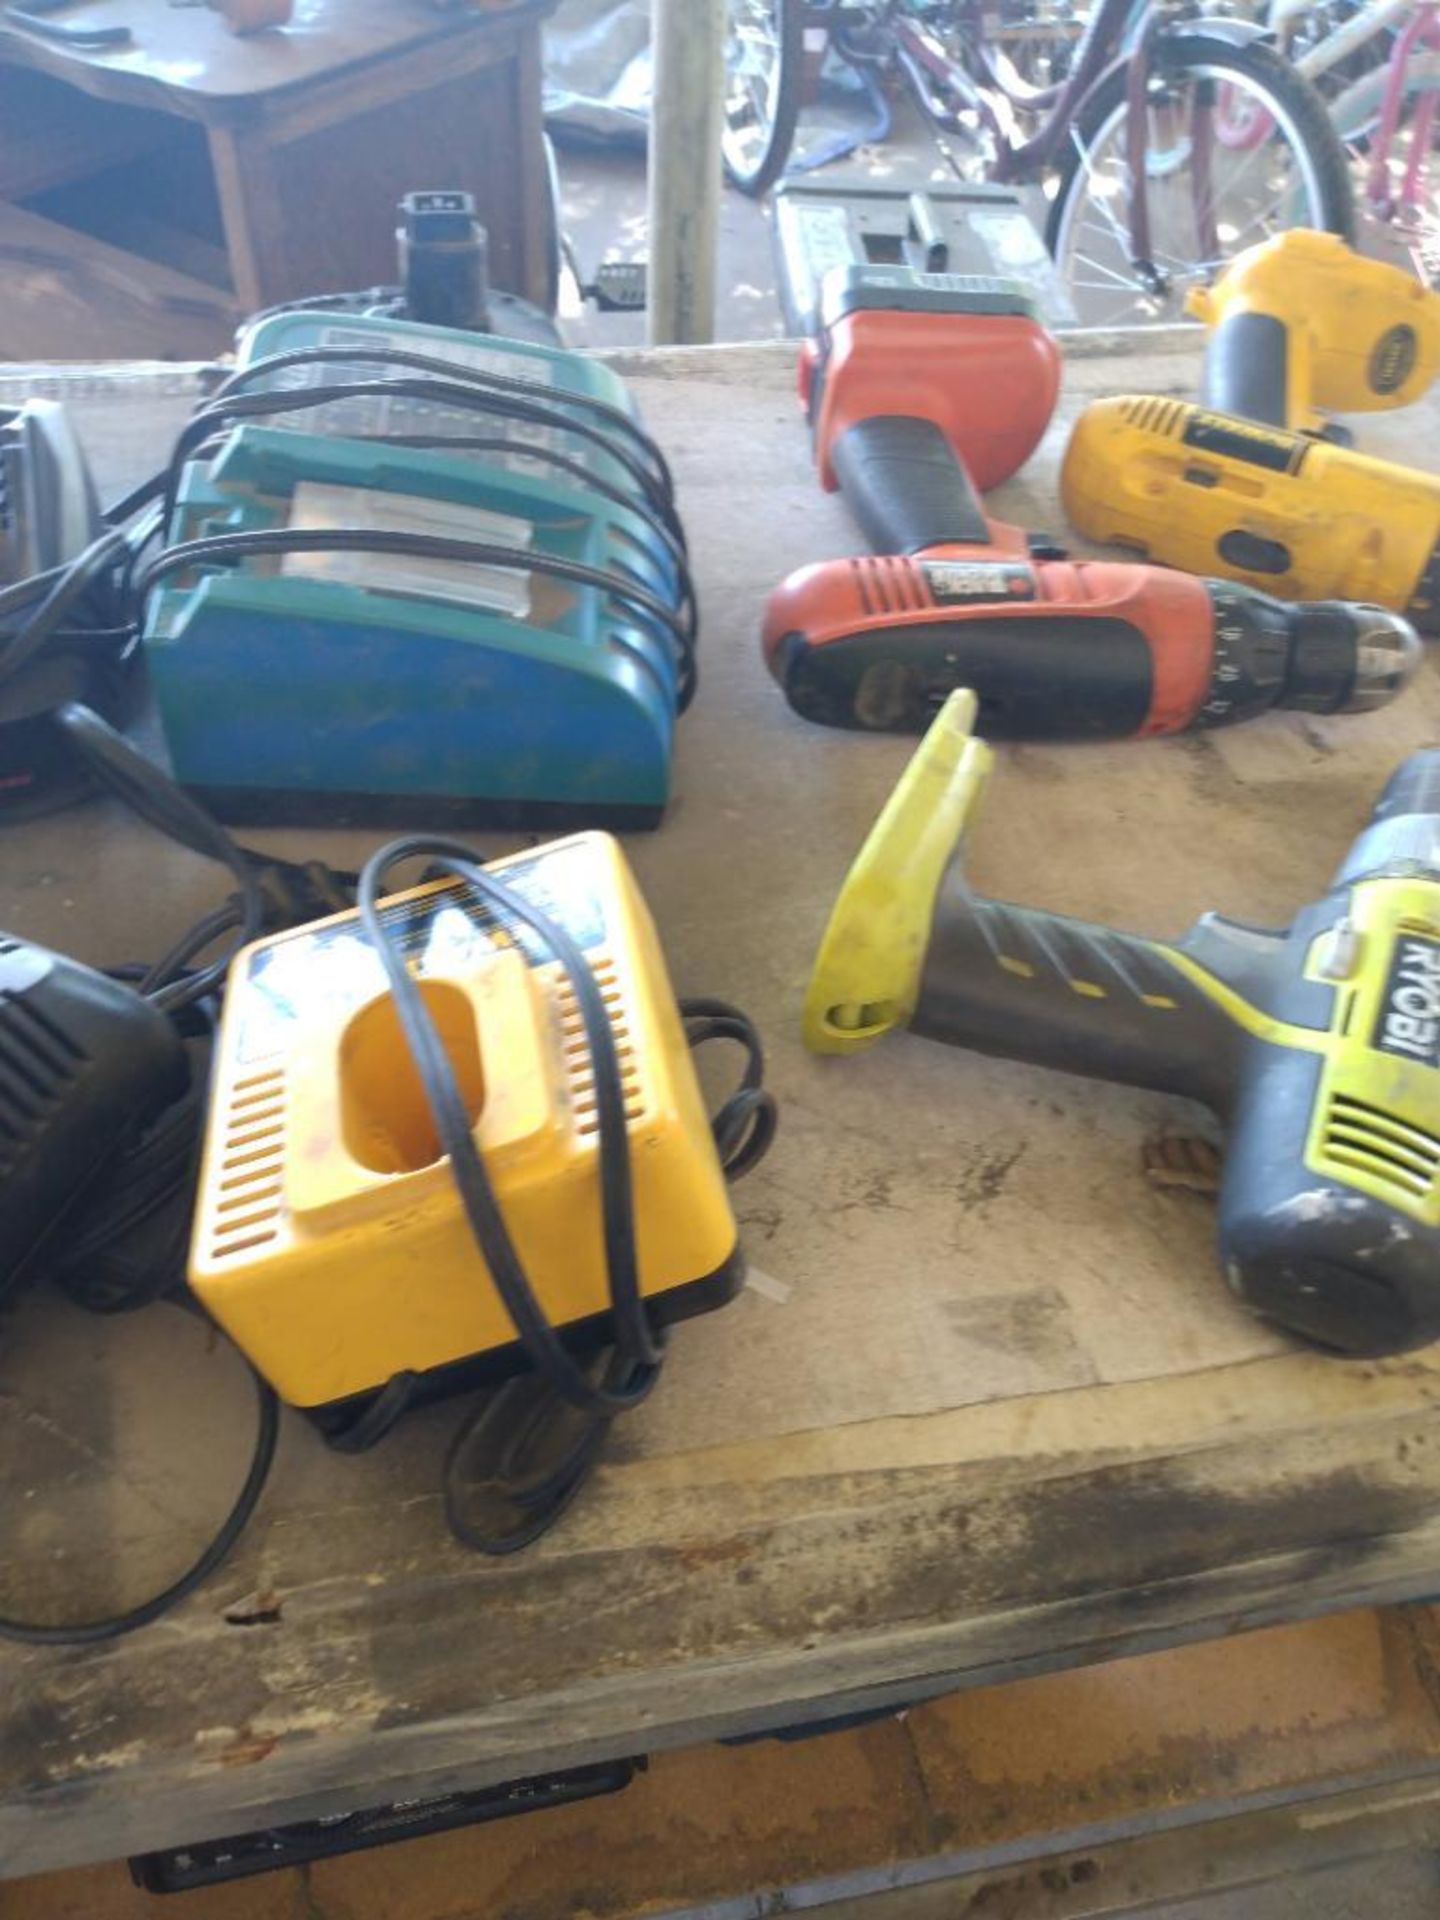 (LOT) ASSORTED CORDLESS ELECTRIC HAND TOOLS, CHARGERS, BATTERIES - Image 4 of 4